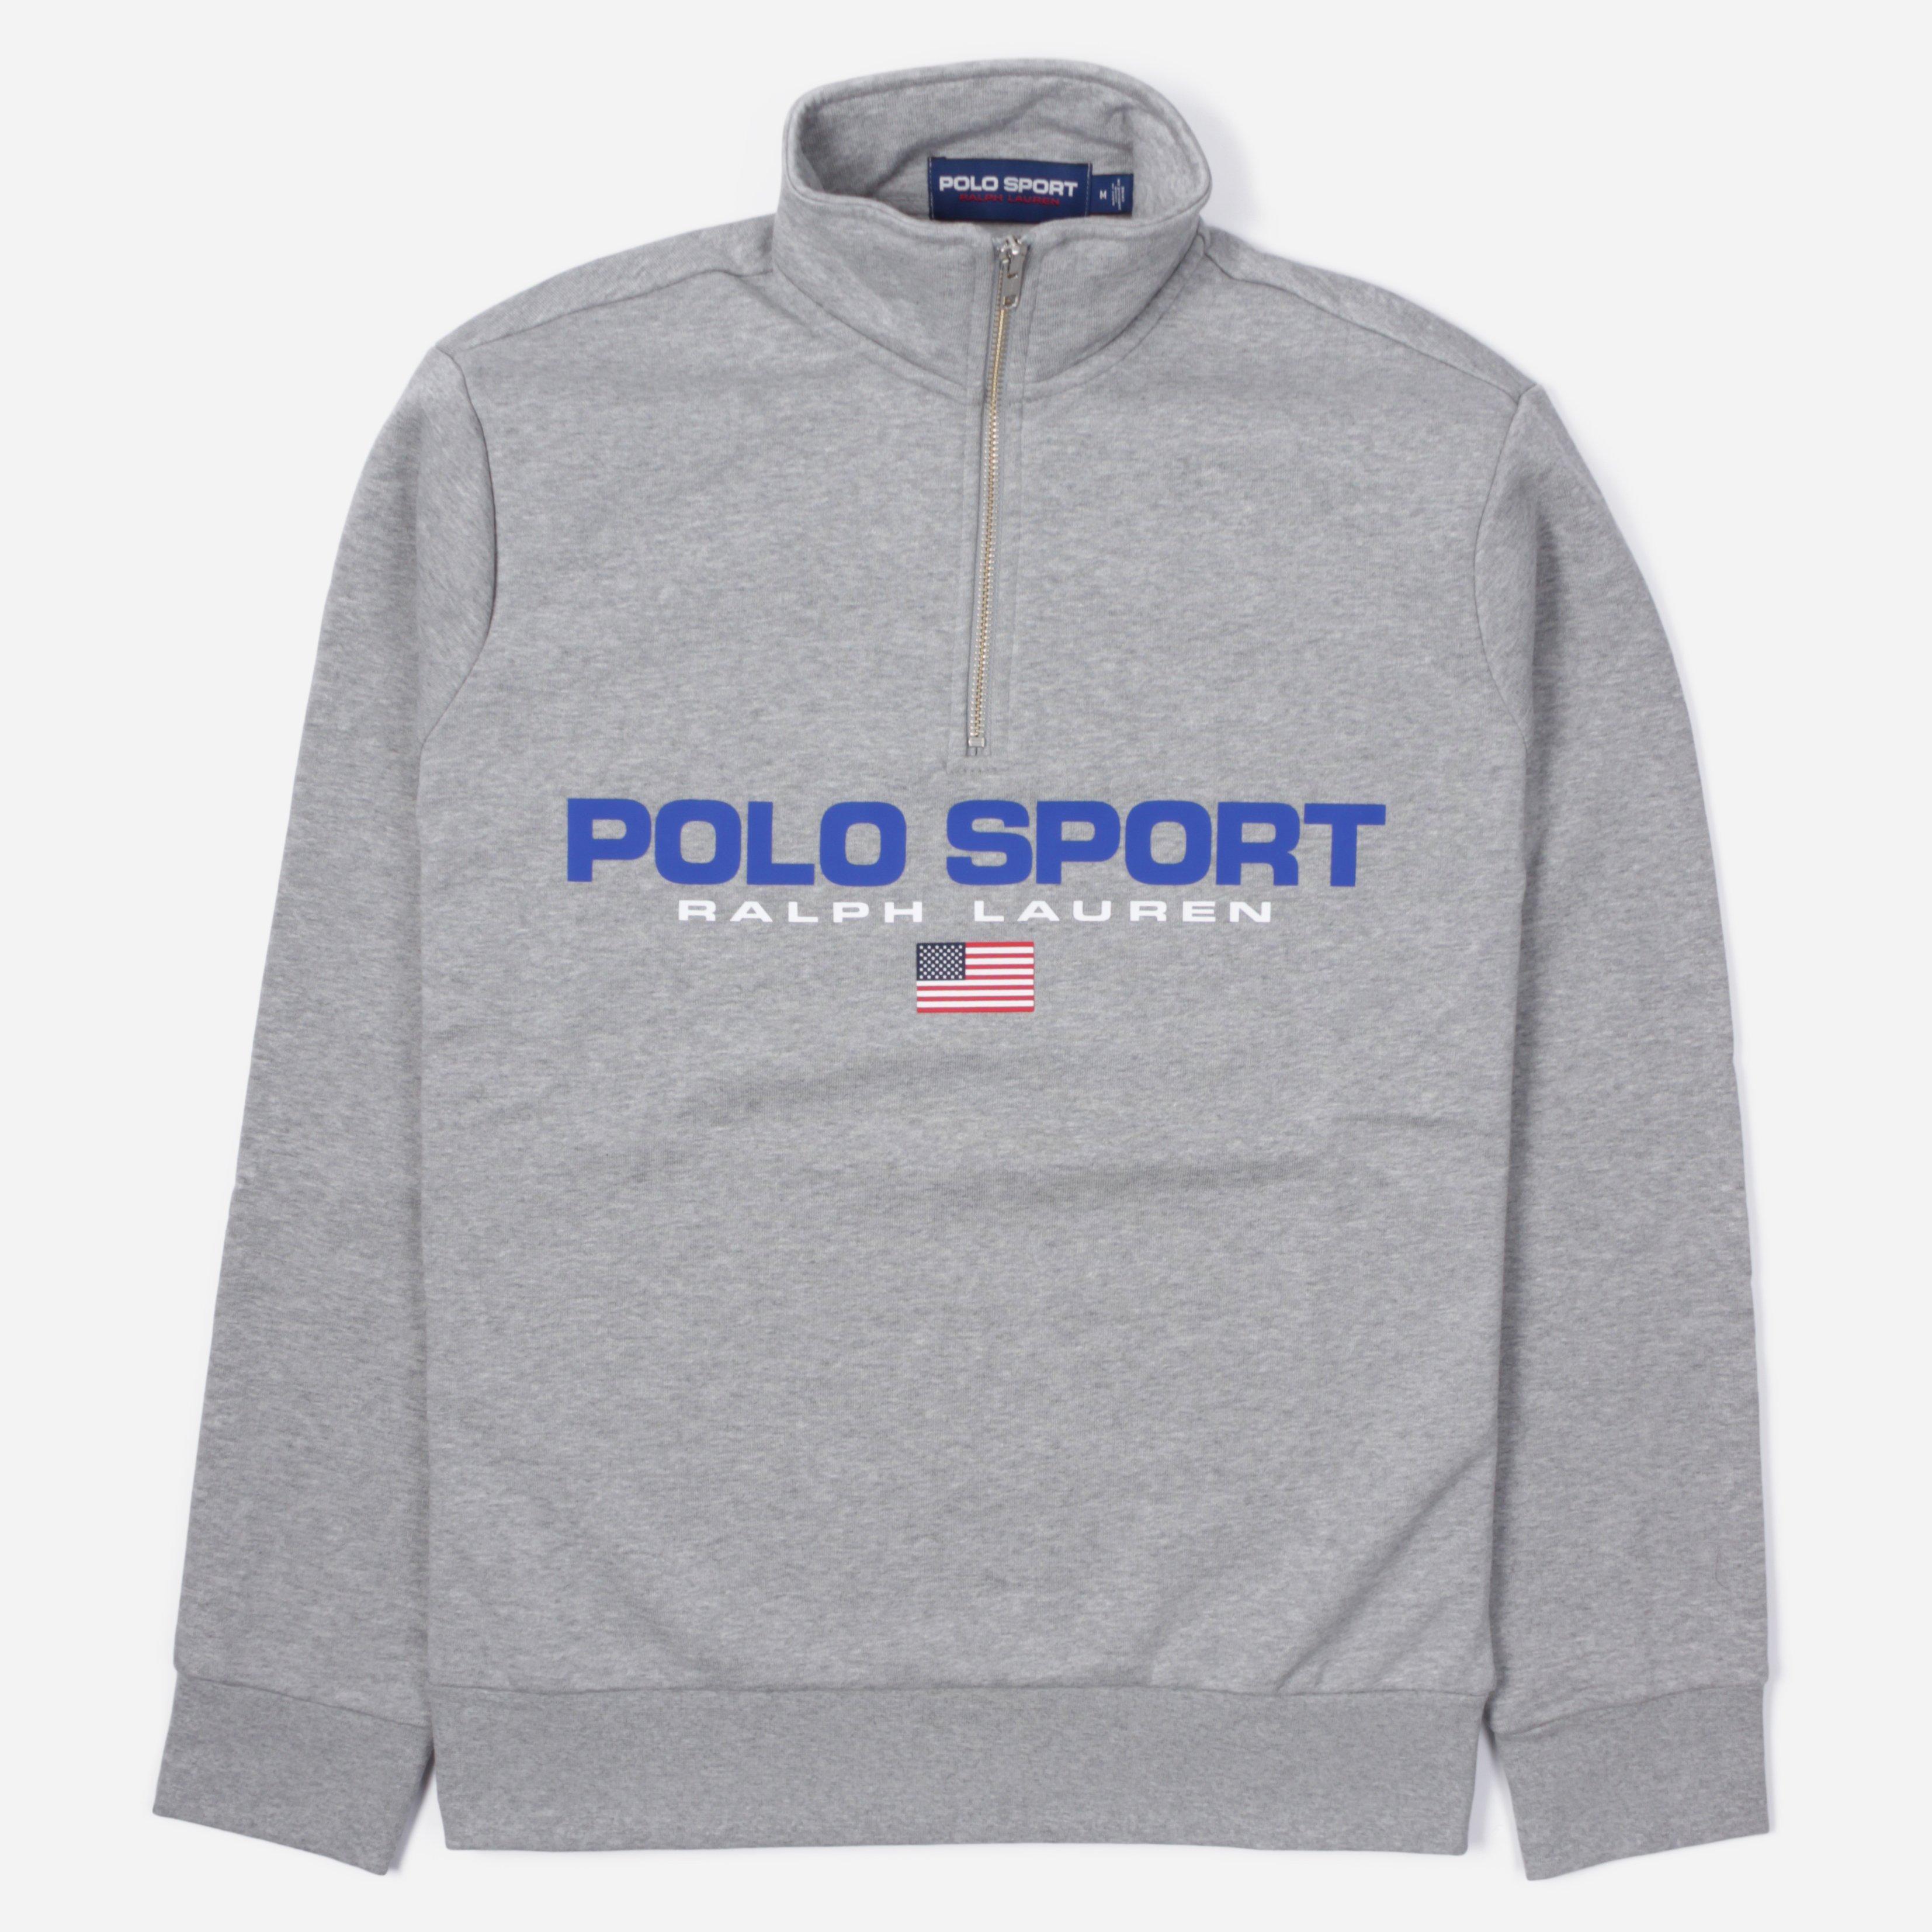 polo sport jacket hoodie,Save up to 17%,www.ilcascinone.com